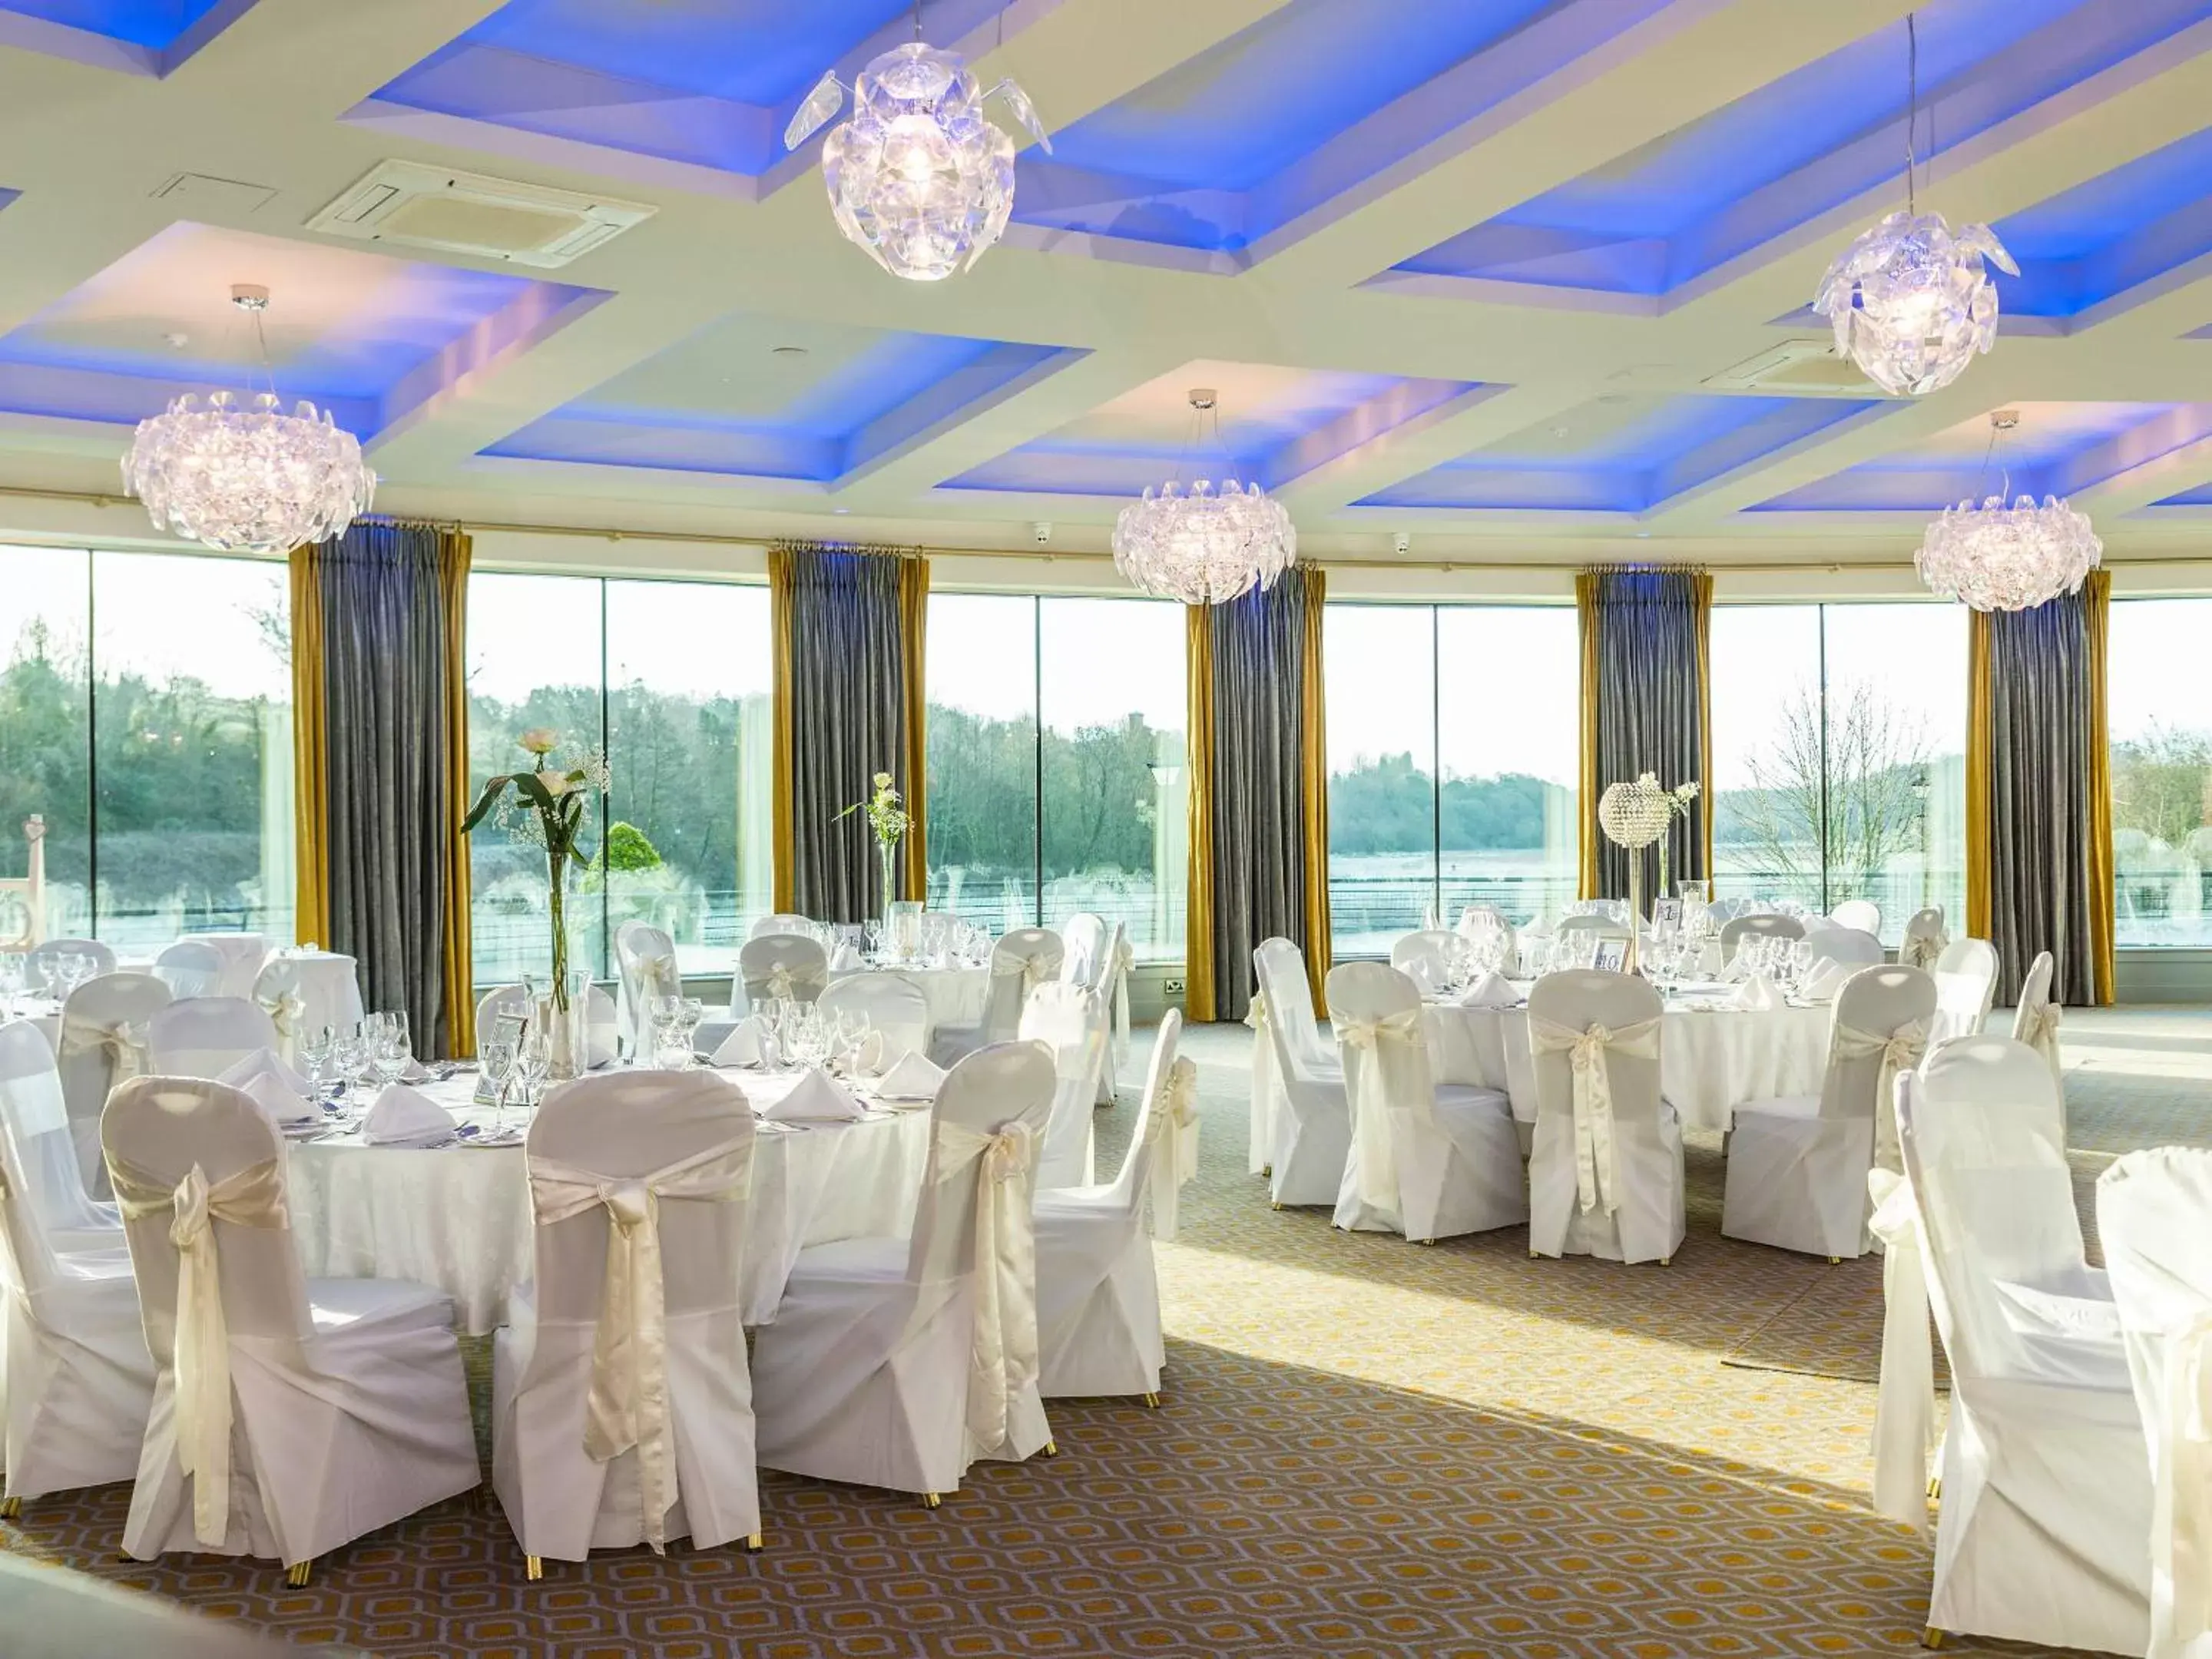 Banquet/Function facilities, Banquet Facilities in The Riverside Park Hotel